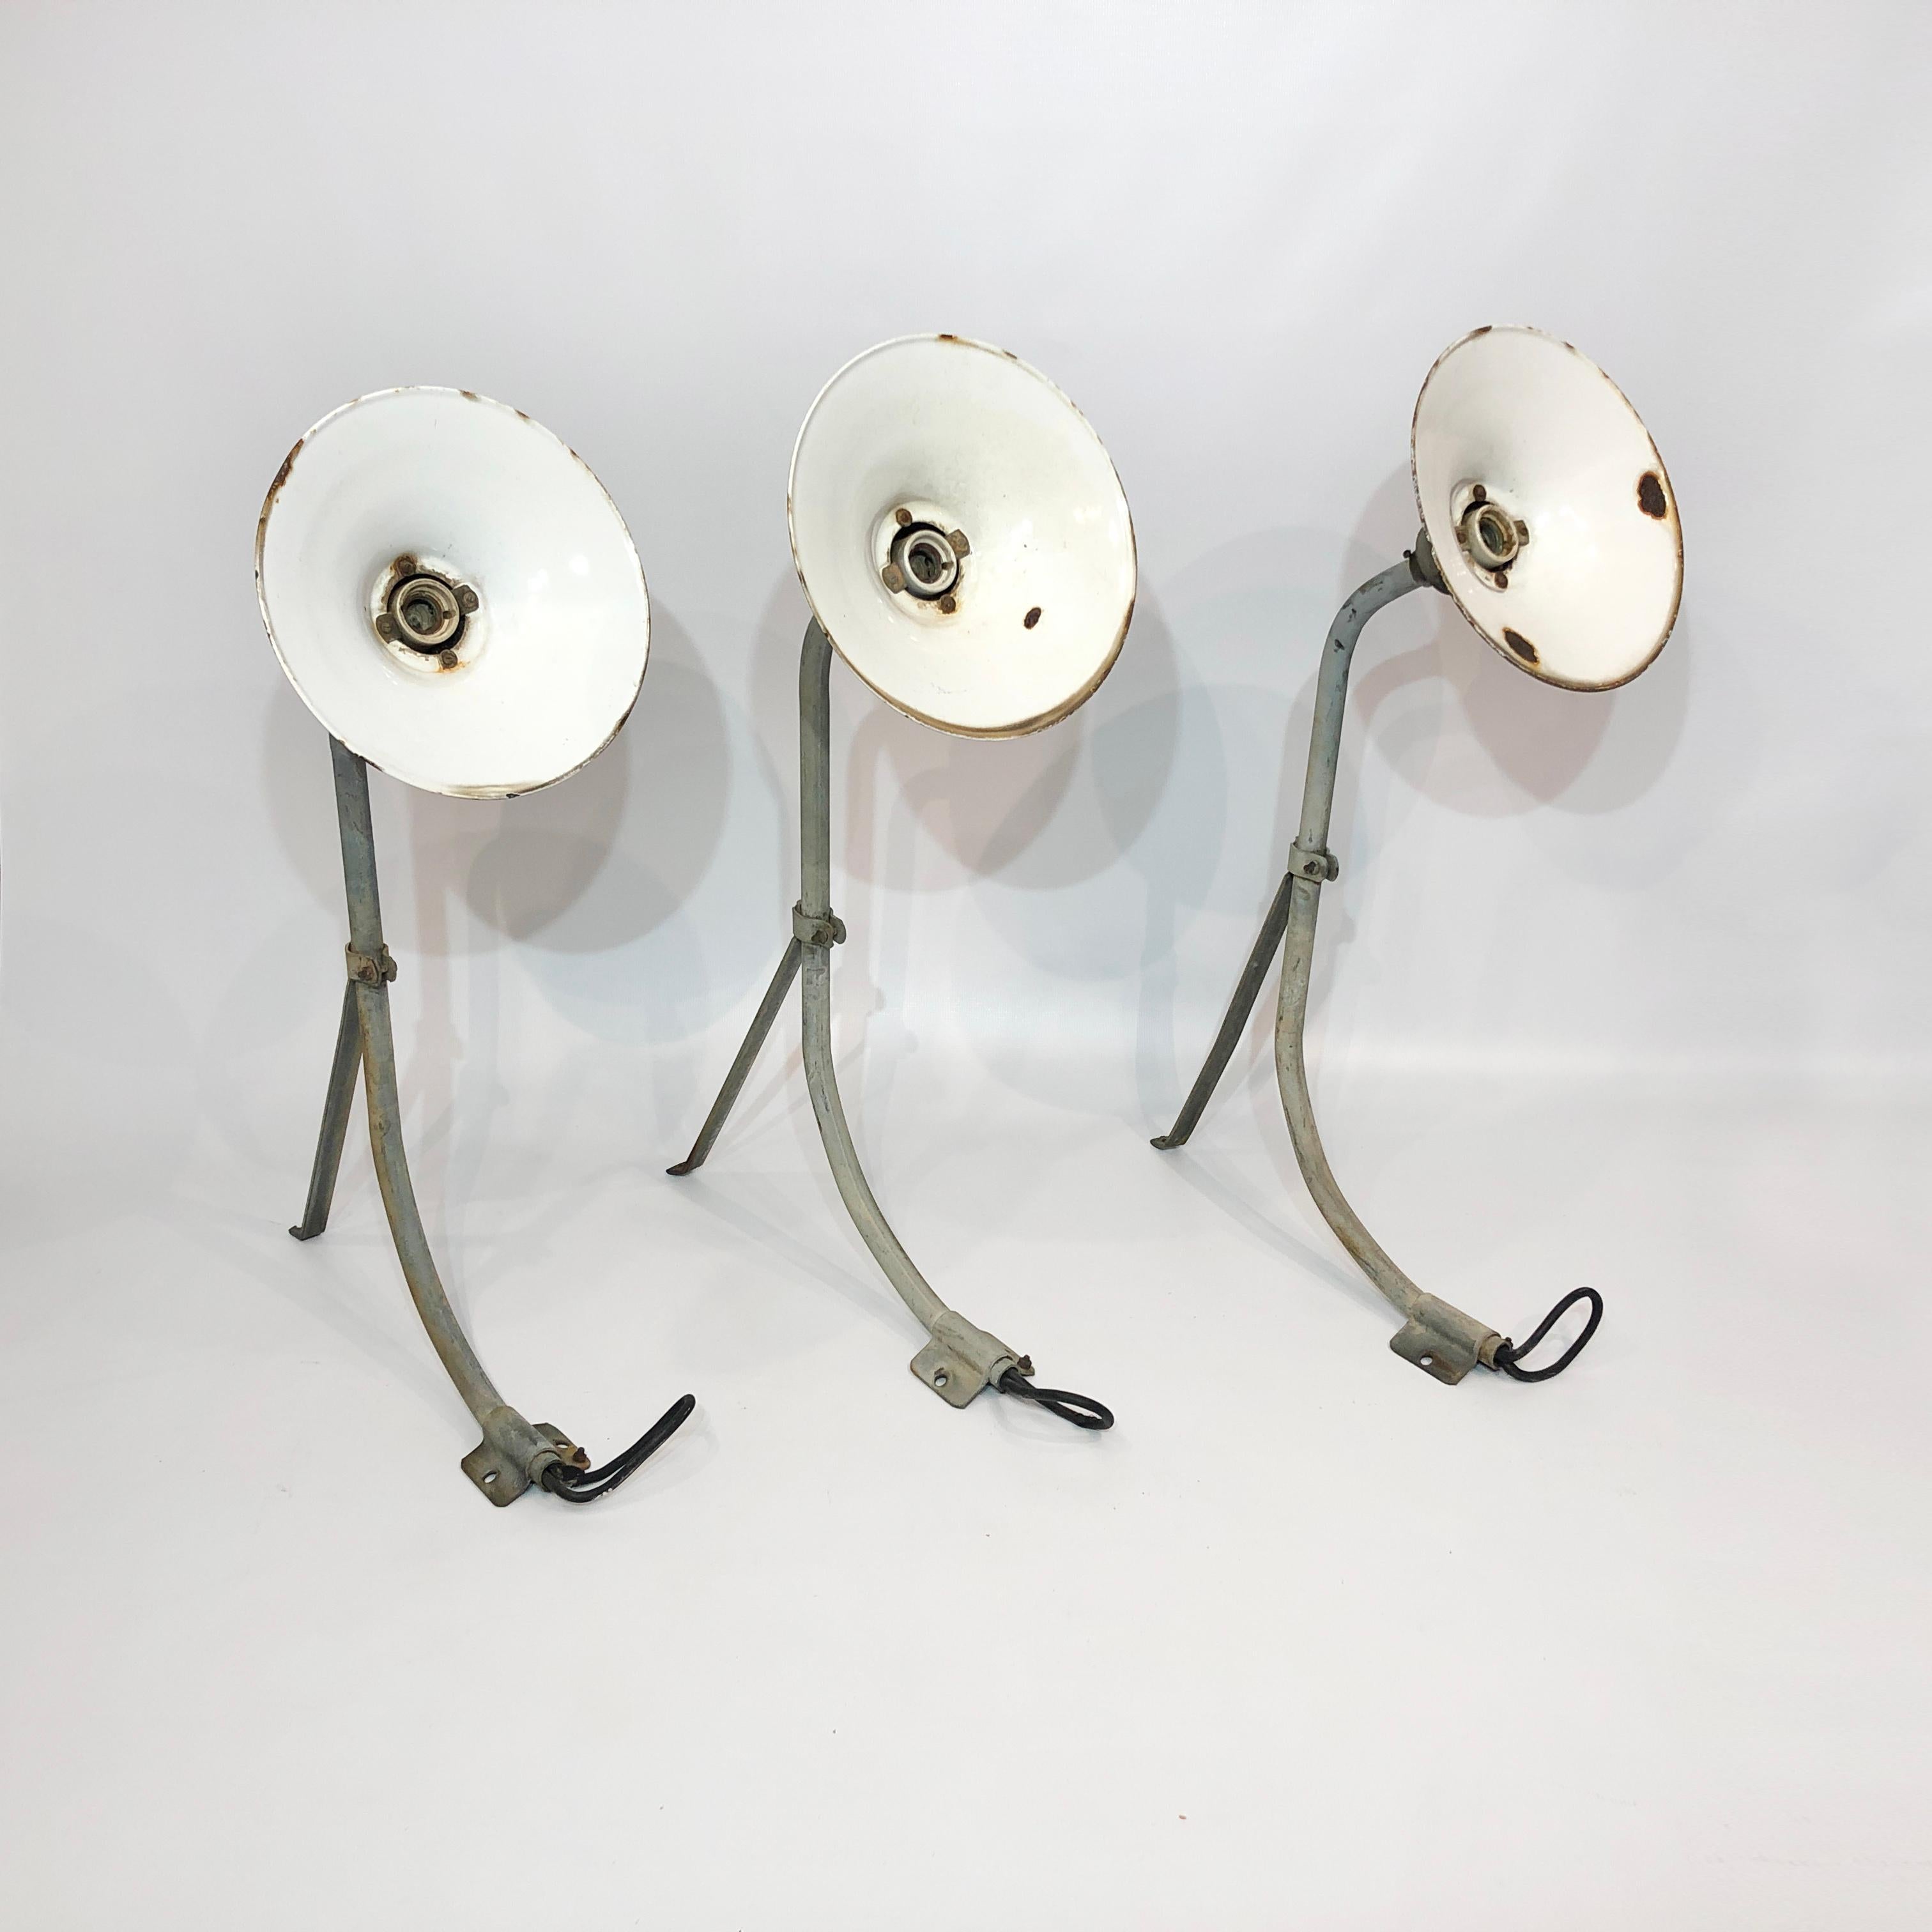 Large Industrial Wall Light 1 of 3 1950s Vintage Retro Commercial Lighting Lamp 7